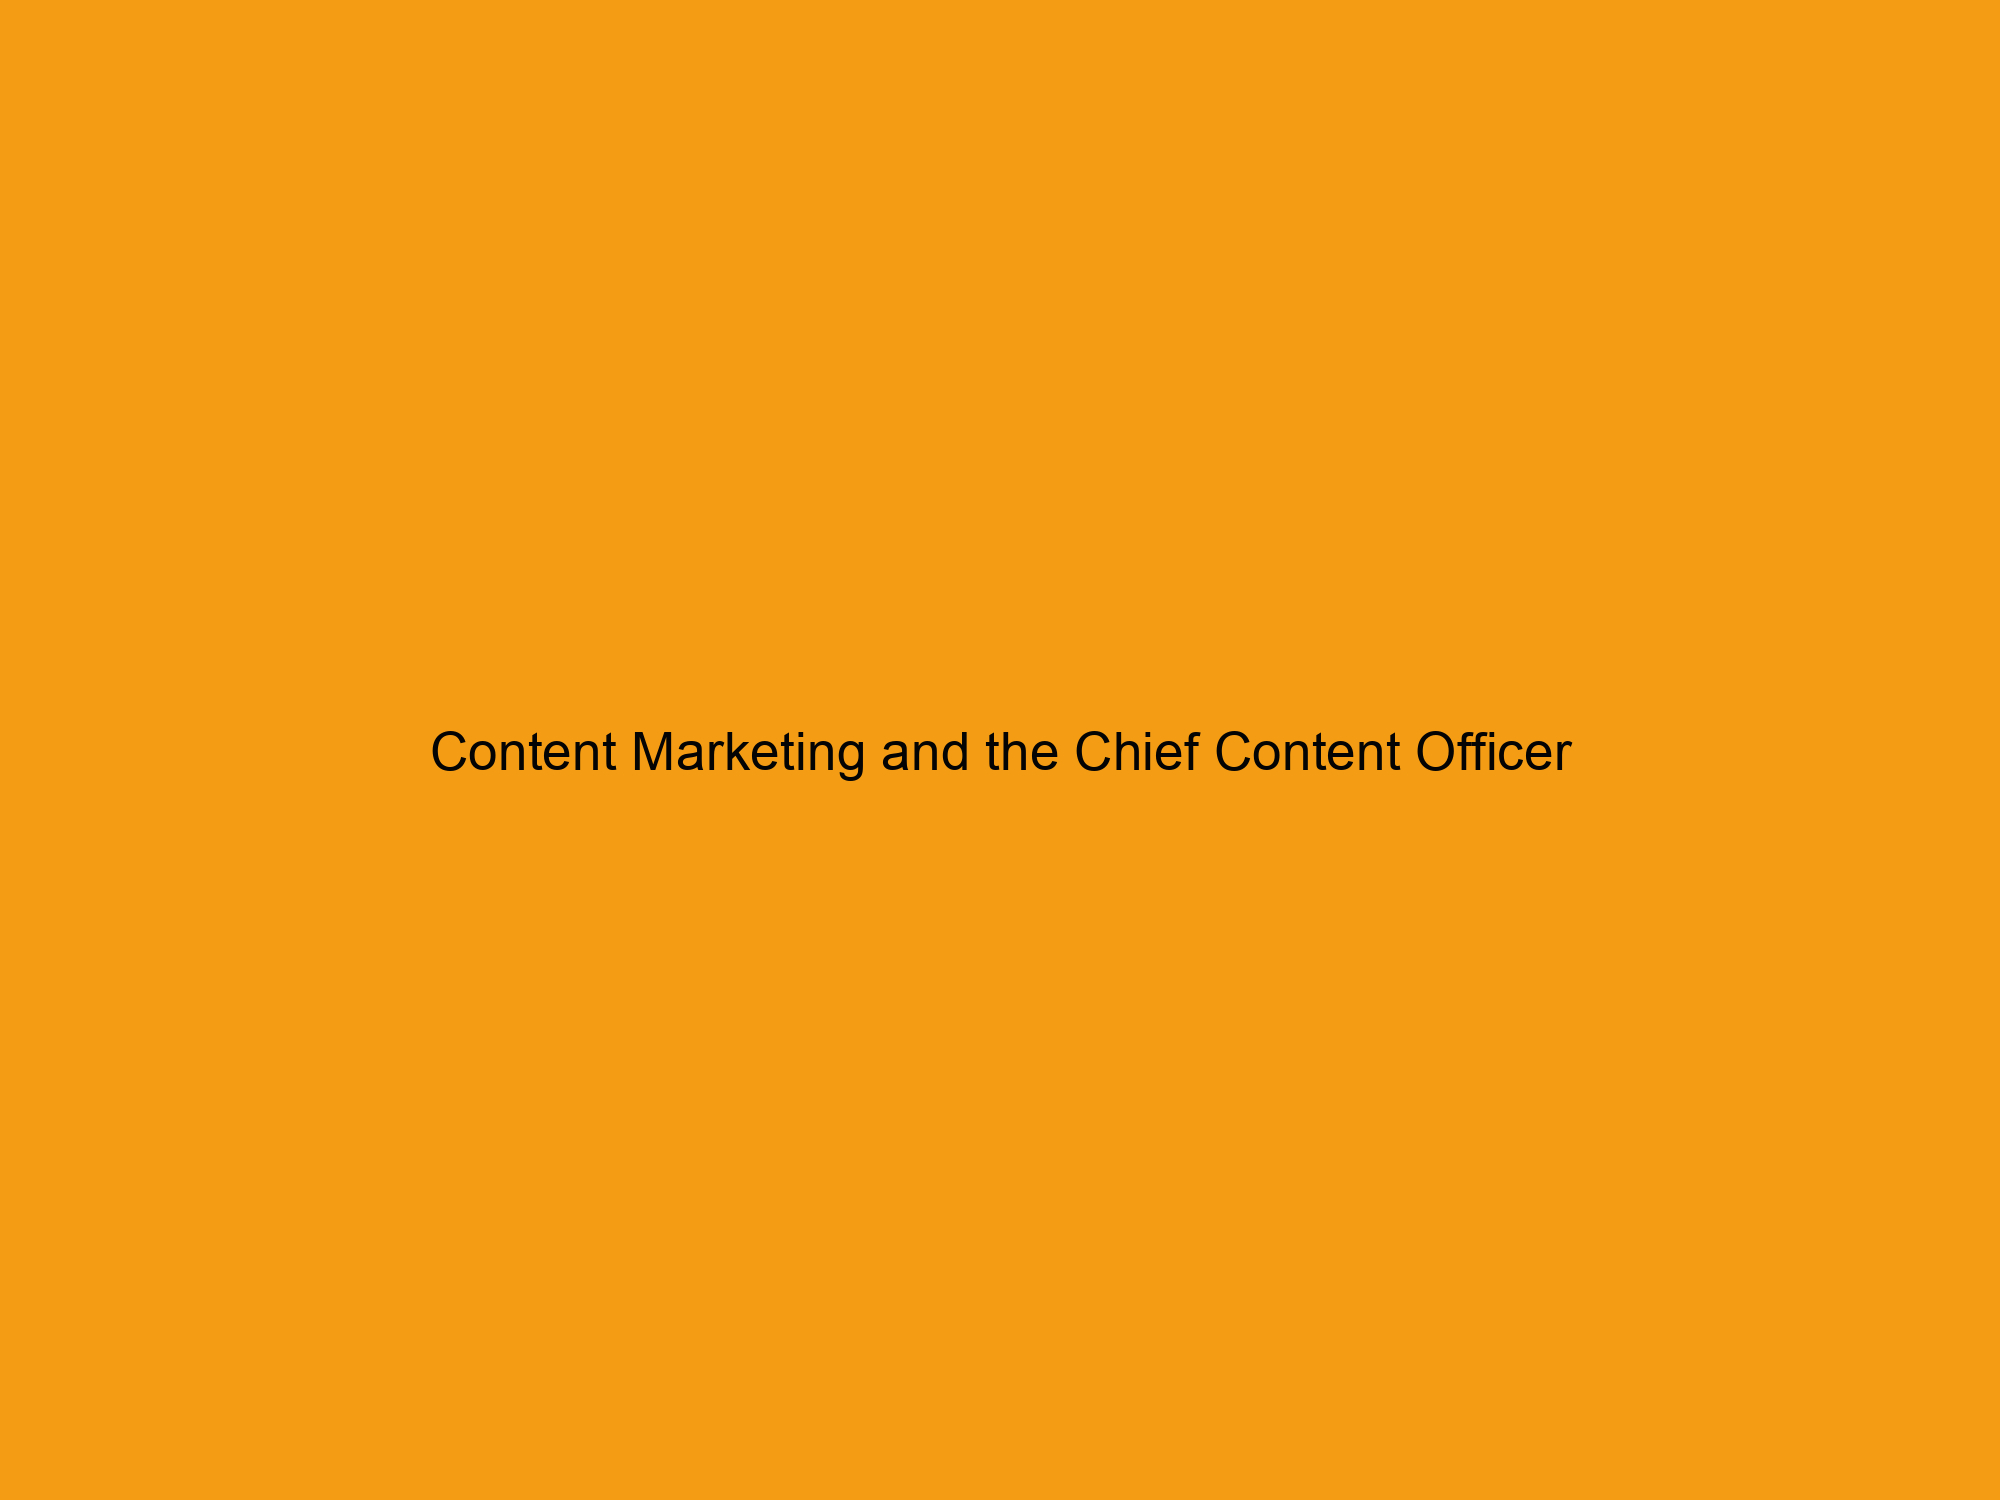 Content Marketing and the Chief Content Officer